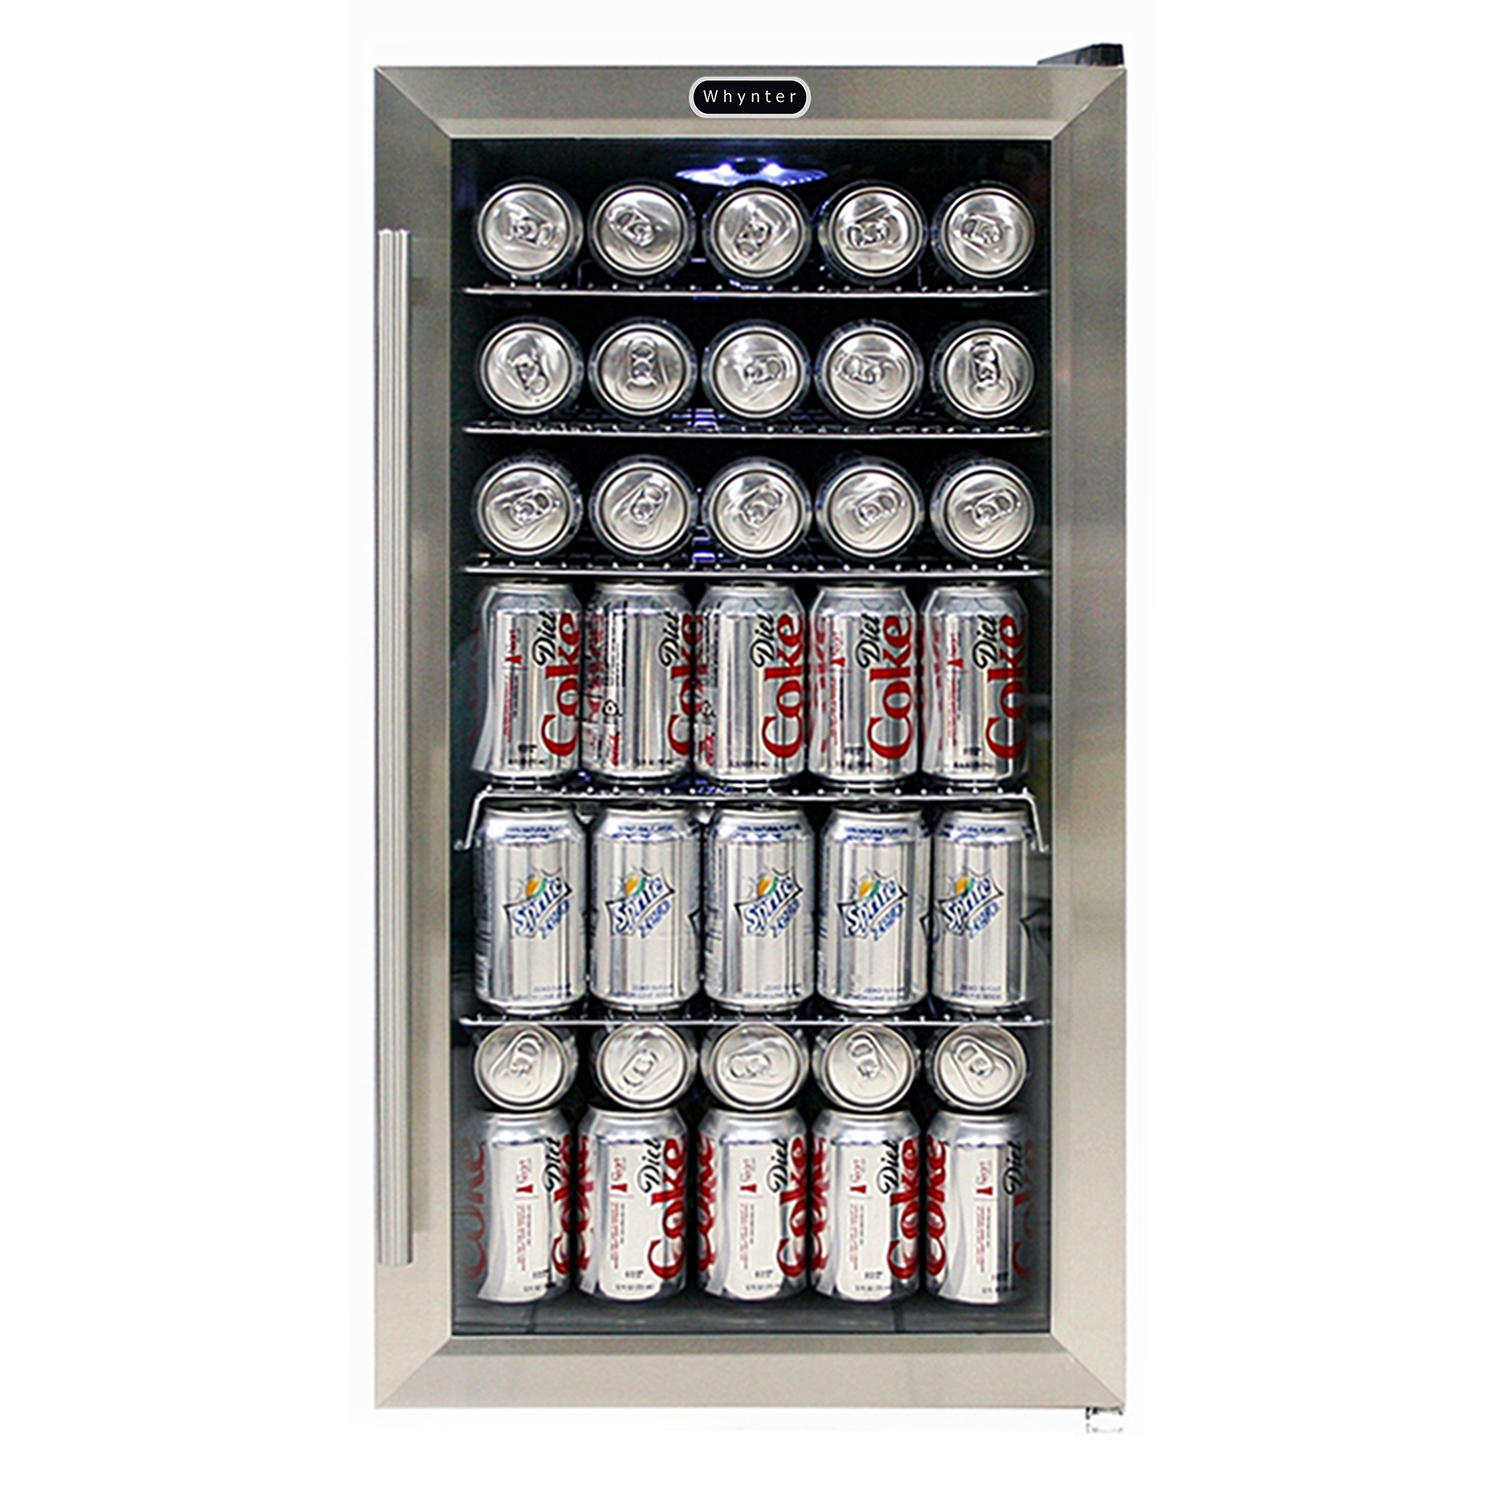 Whynter Beverage Refrigerator with Internal Fan - Stainless Steel 120-Can Capacity